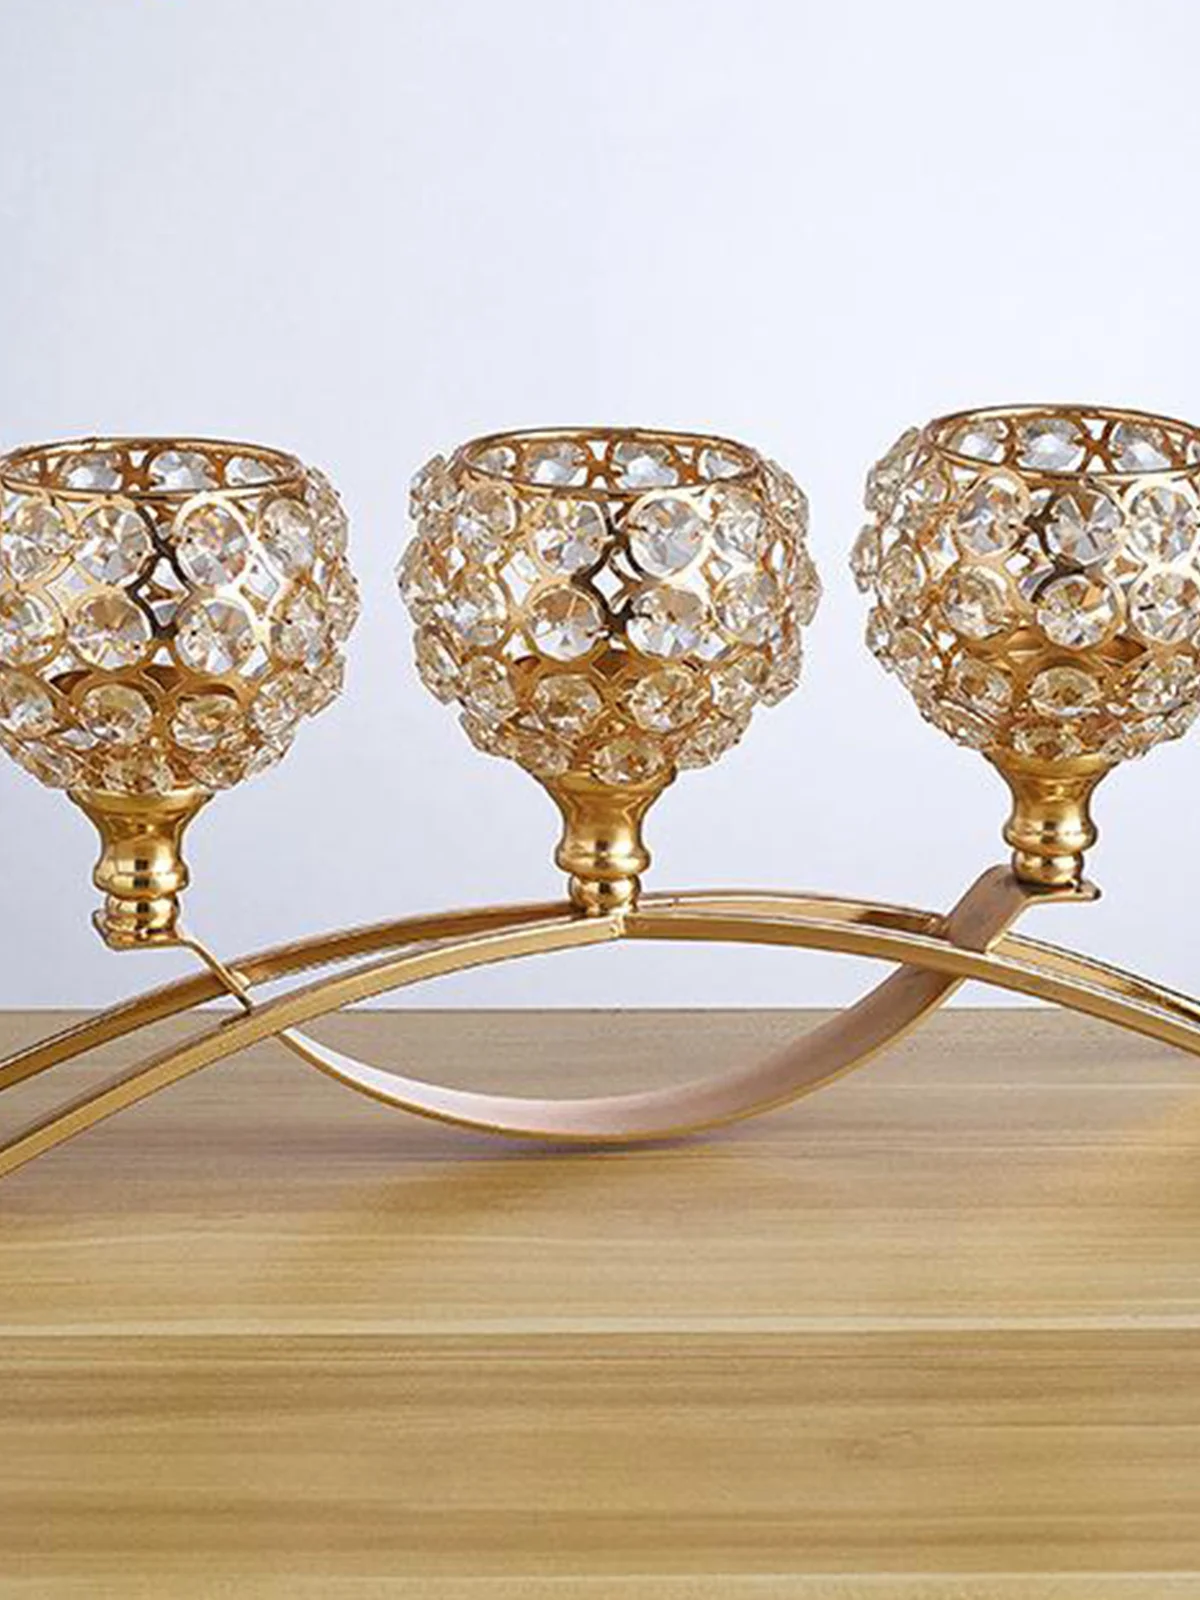 3 Arms Crystal Candelabra Candle Holders Dining Table Decor Wedding Centerpiece 